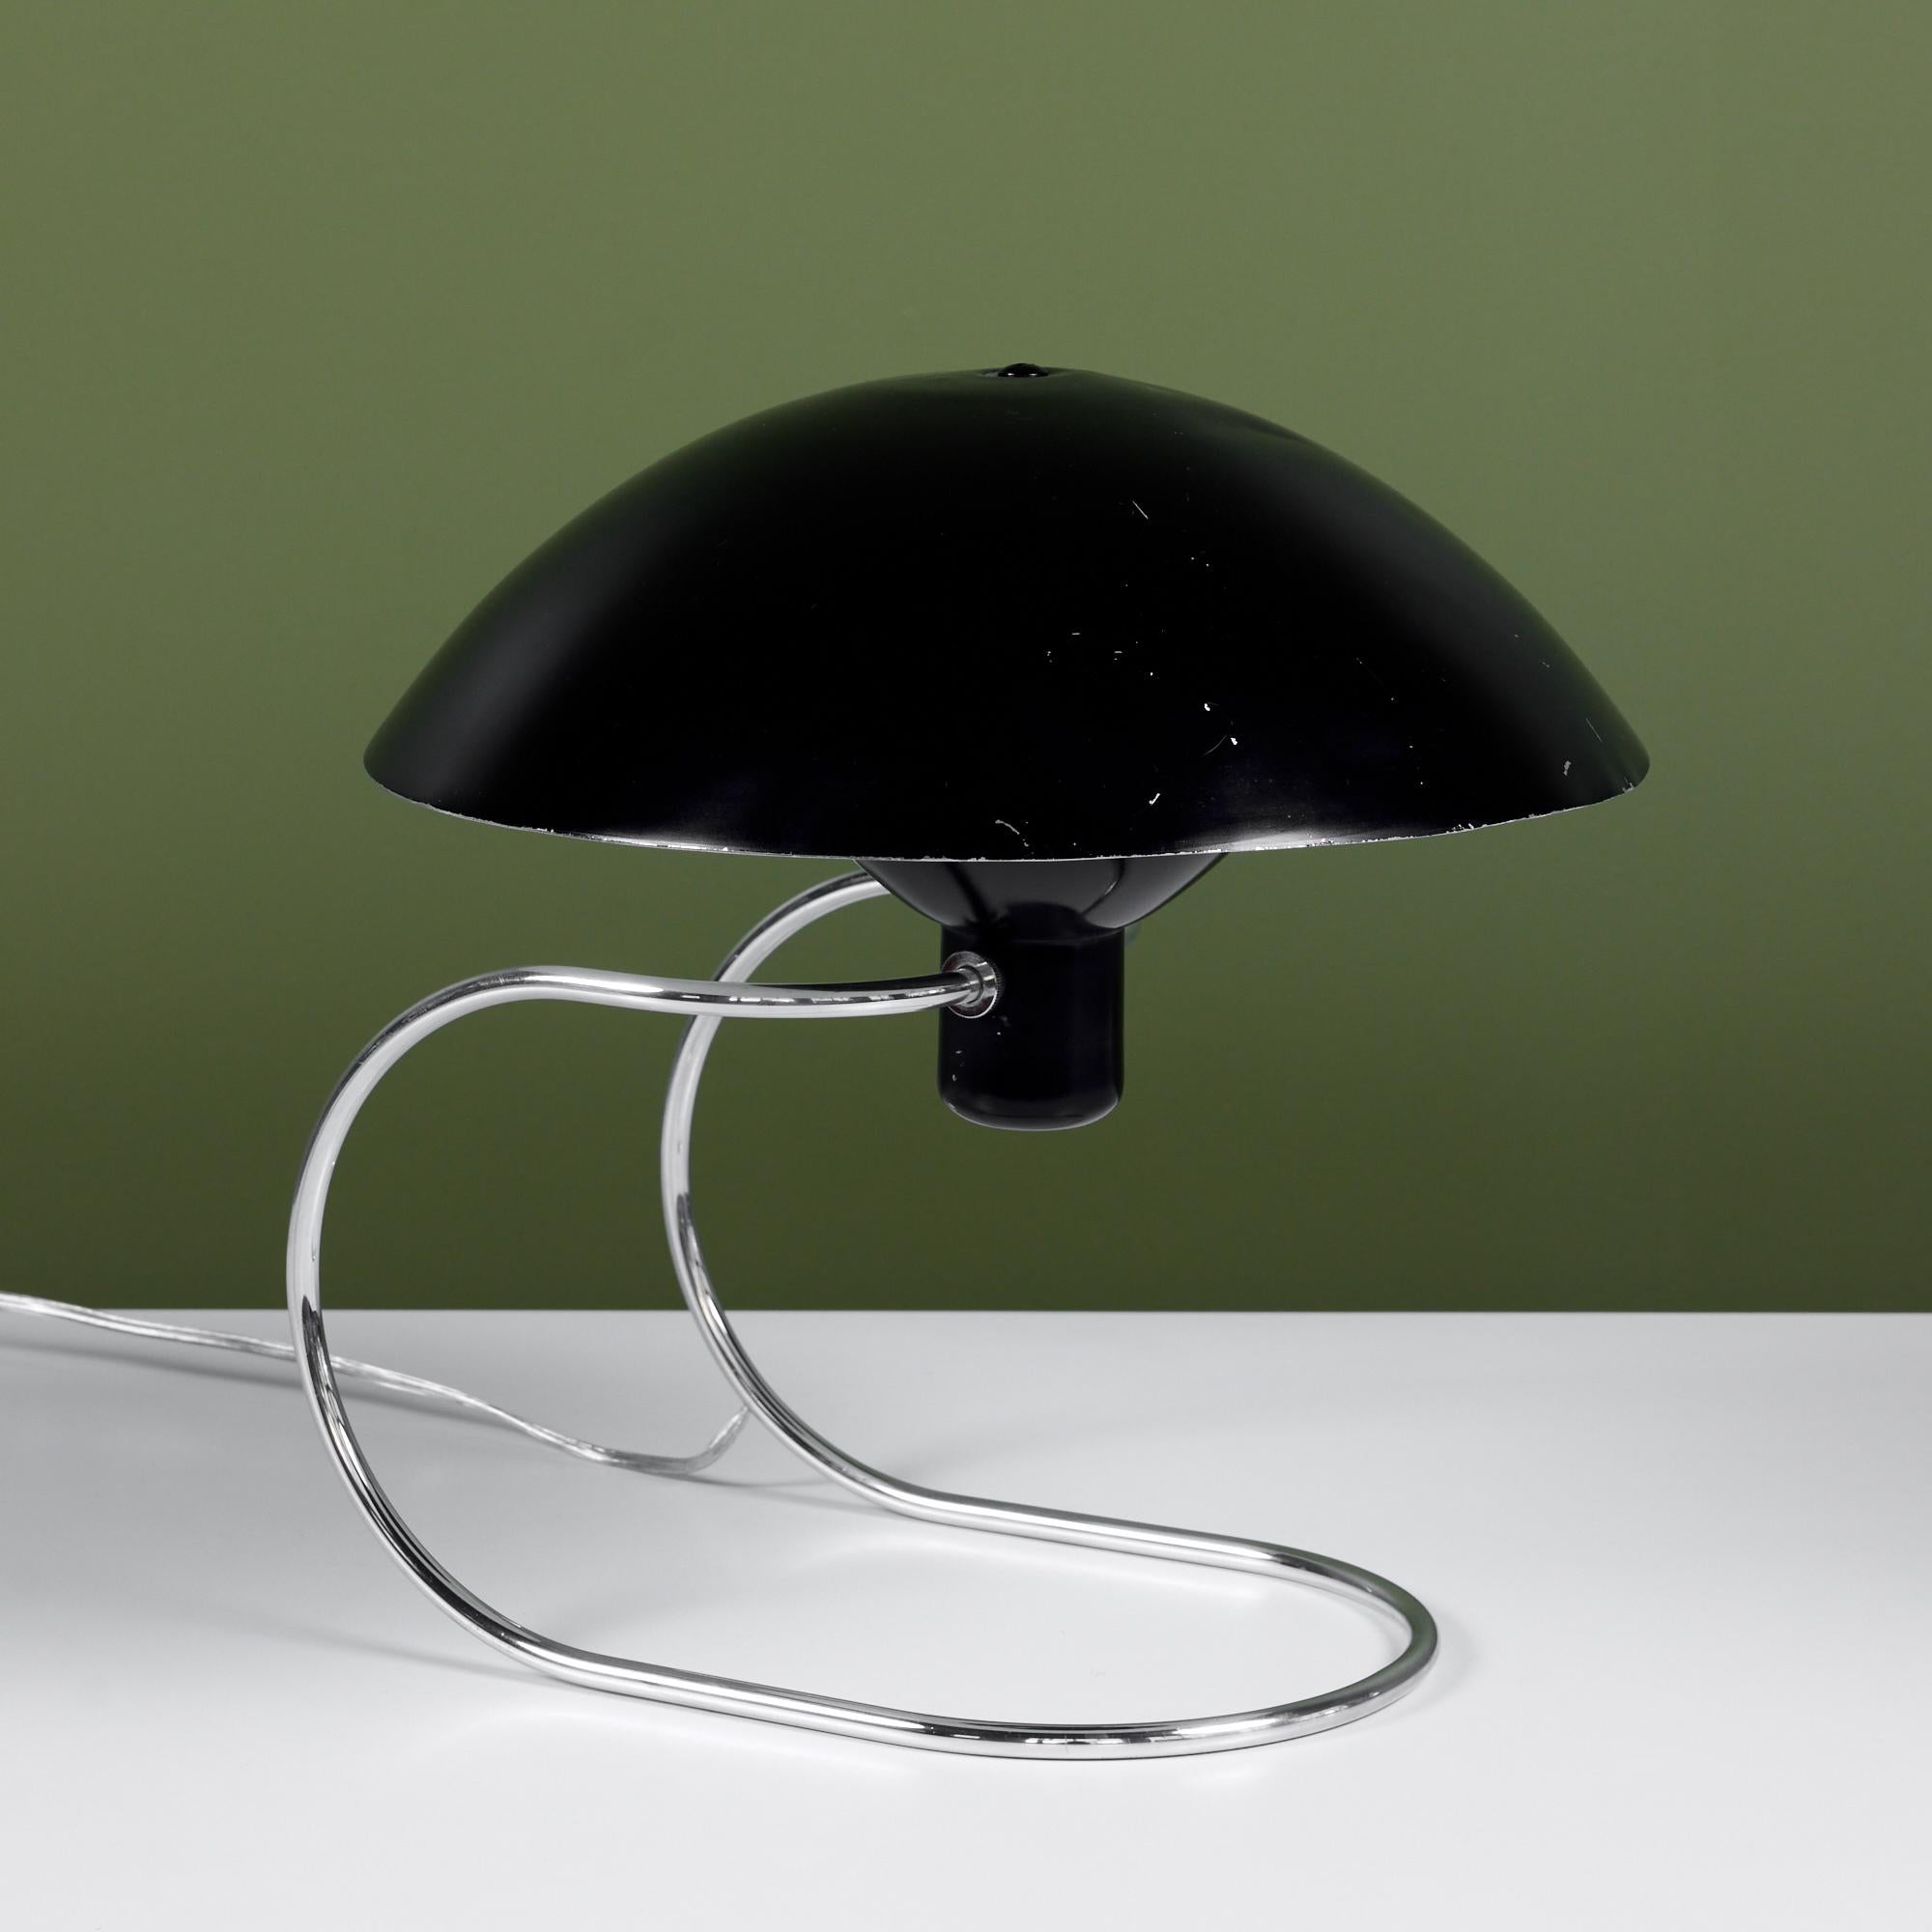 The Anywhere Lamp, designed by Greta von Nessen c.1952, USA, for Nessen Studios. The lamp coined its name by being able to be placed anywhere! It was originally advertised to be used as a table lamp, wall lamp or hanging pendant. It features a black